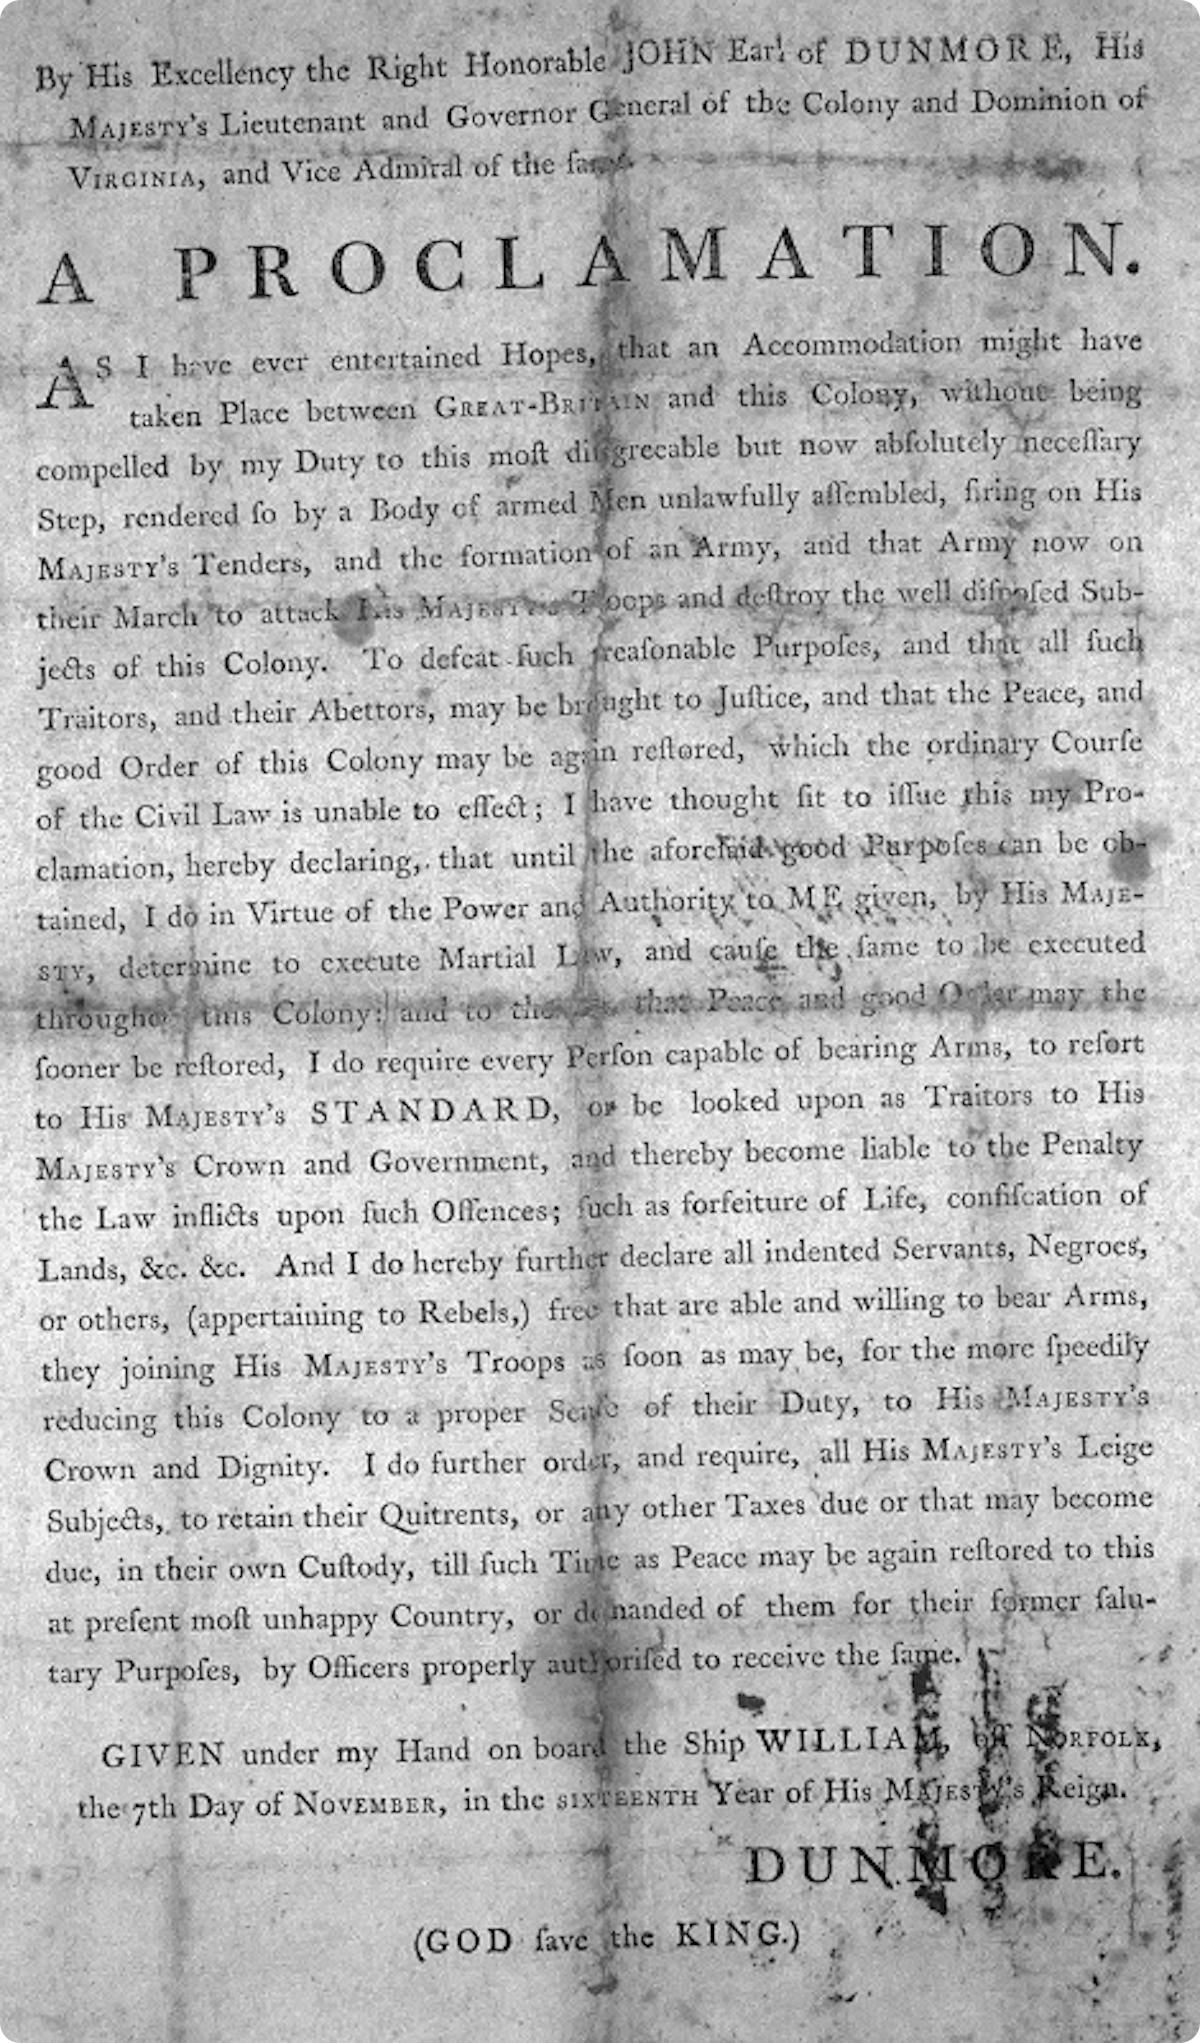 Dunmore's Proclamation, 1775